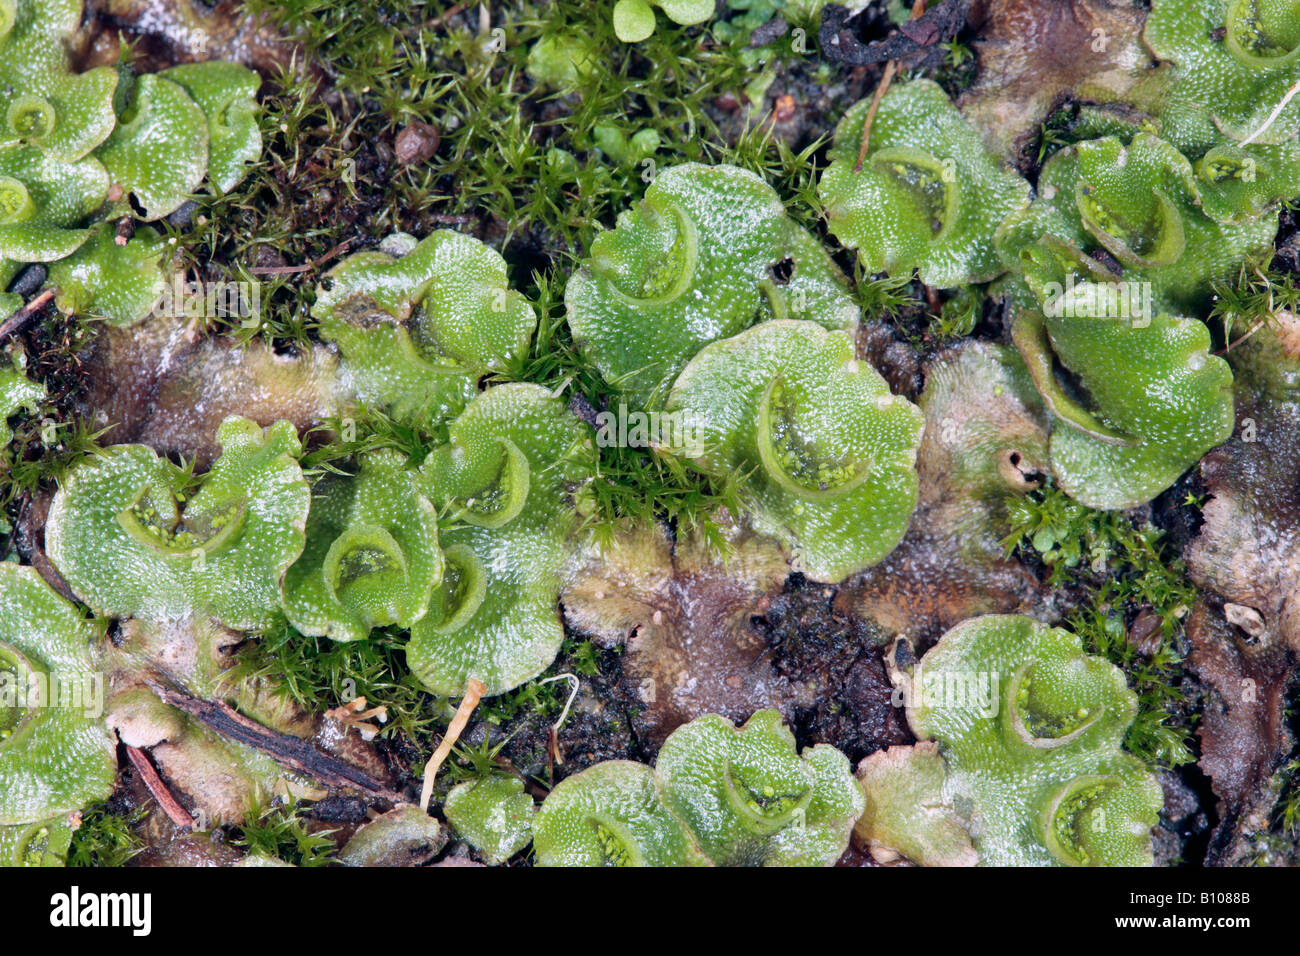 Close-up of Thallose Liverwort with Tortula moss] showing crescent-shaped gemmae cups with gemmae inside- Lunularia cruciata Stock Photo